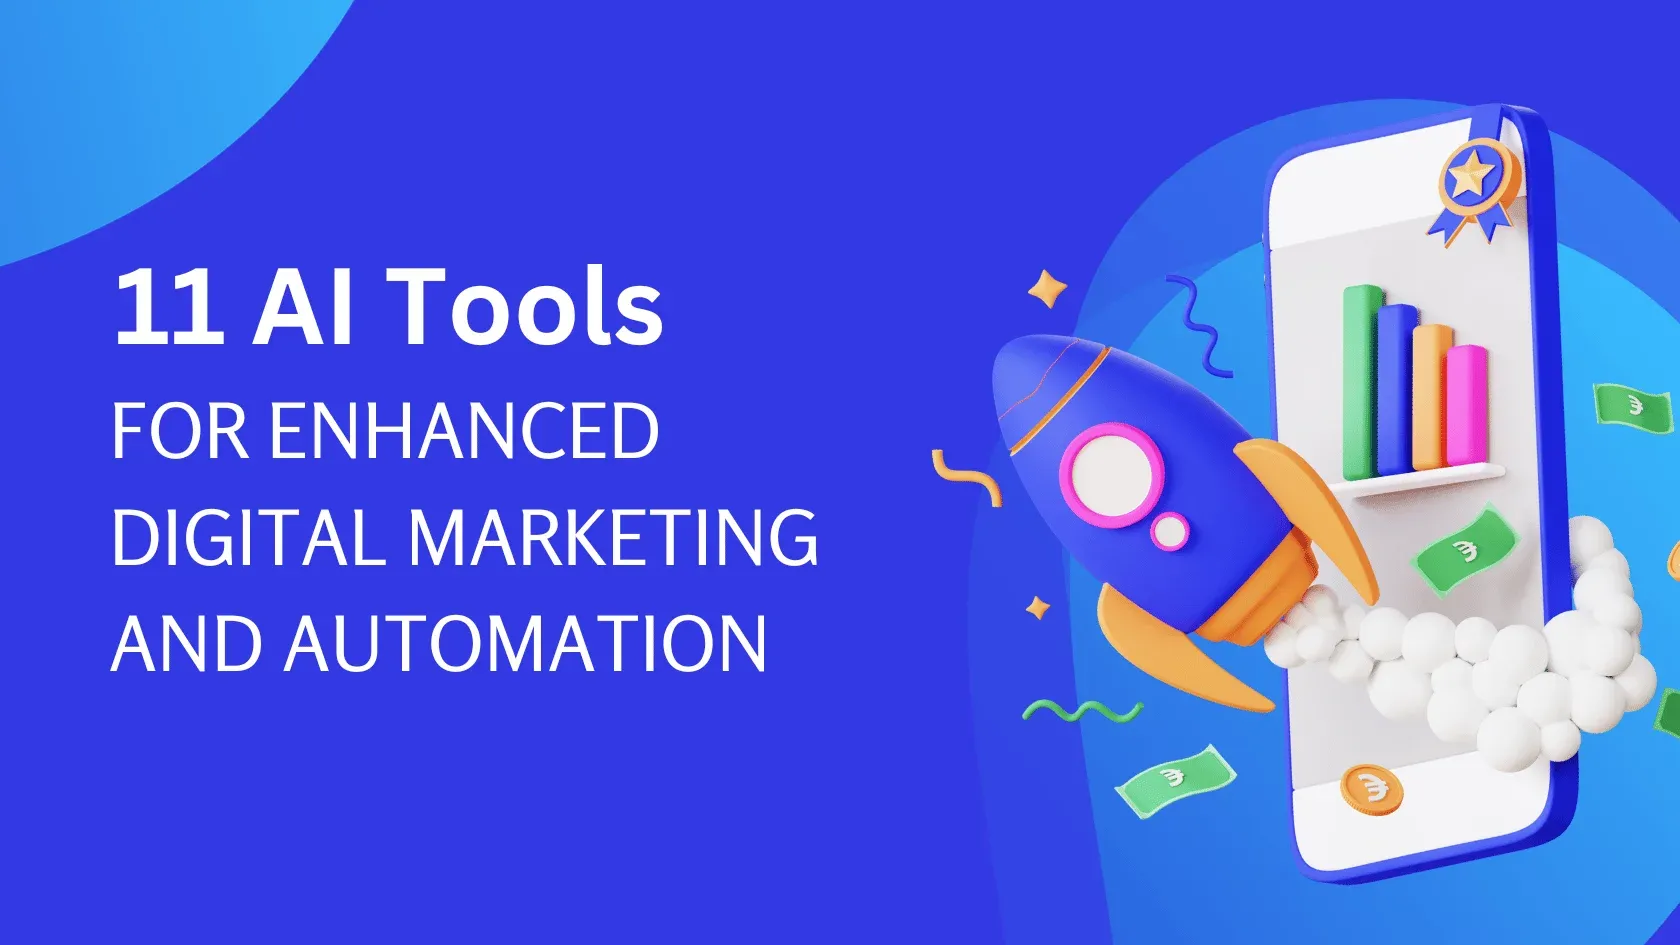 Graphic banner with text "11 AI Tools for Enhanced Digital Marketing and Automation" with a rocket and mobile device.